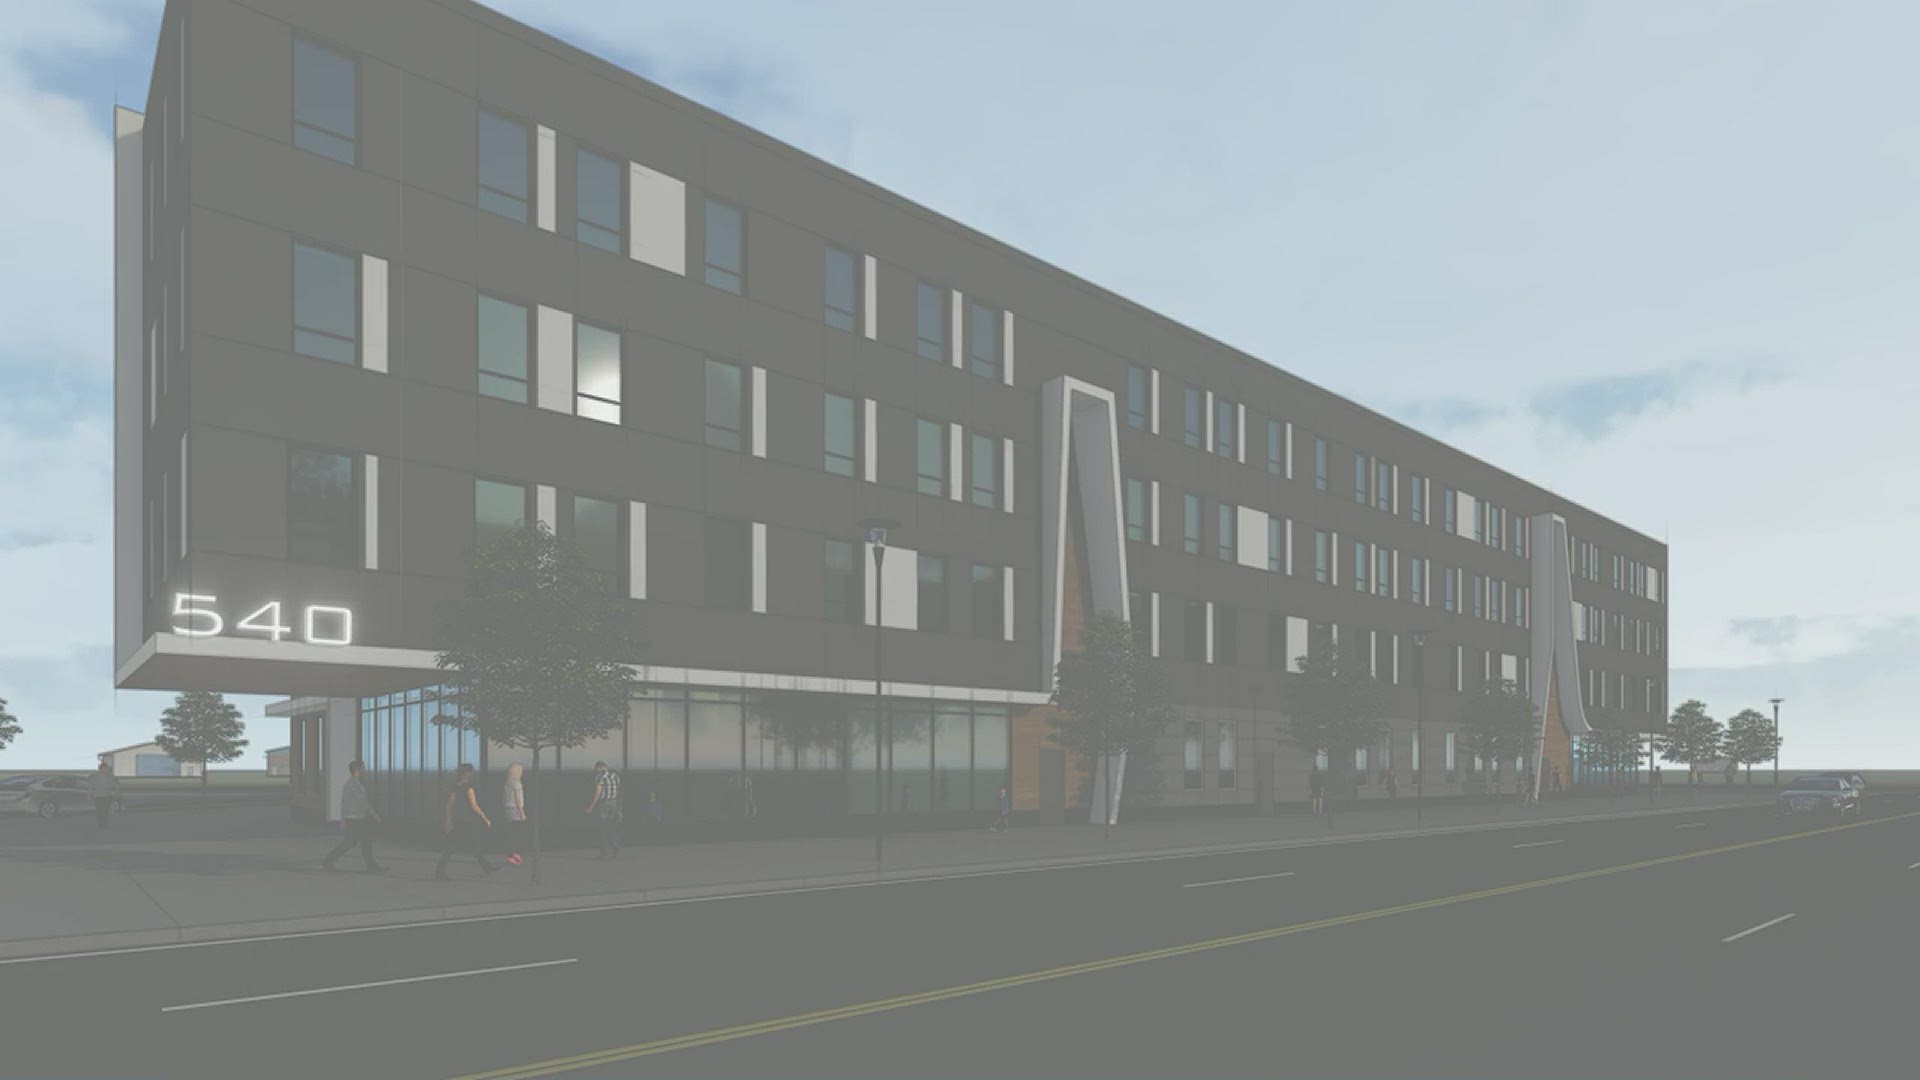 The apartments and retail are located near the CT Fast Track station